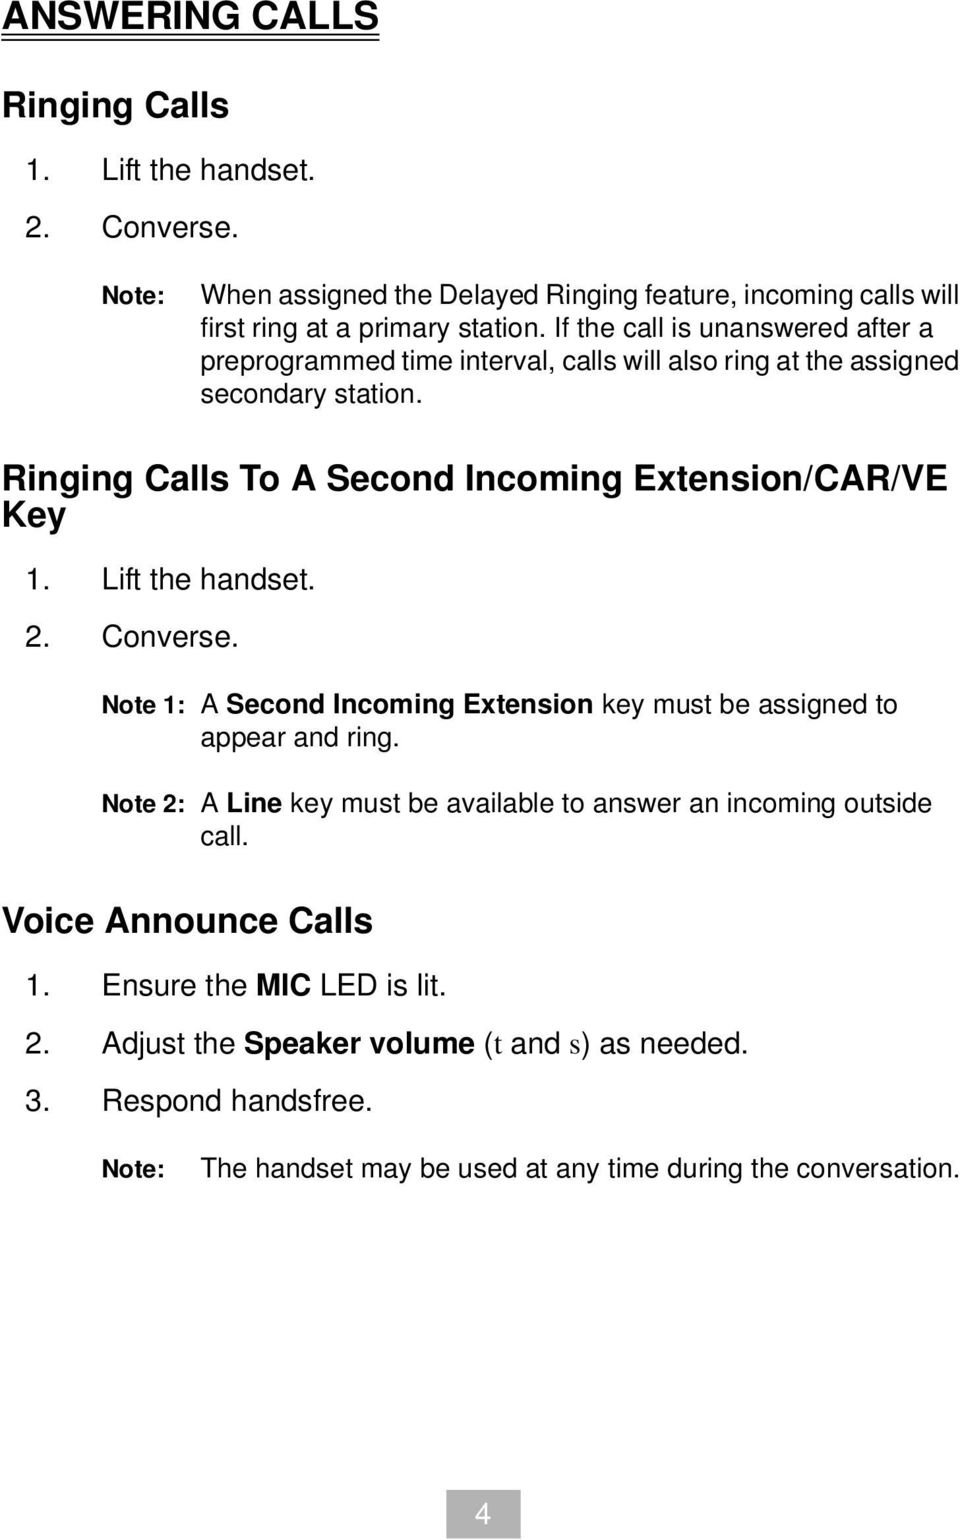 Ringing Calls To A Second Incoming Extension/CAR/VE Key 1. Lift the handset. 2. Converse. Note 1: A Second Incoming Extension key must be assigned to appear and ring.